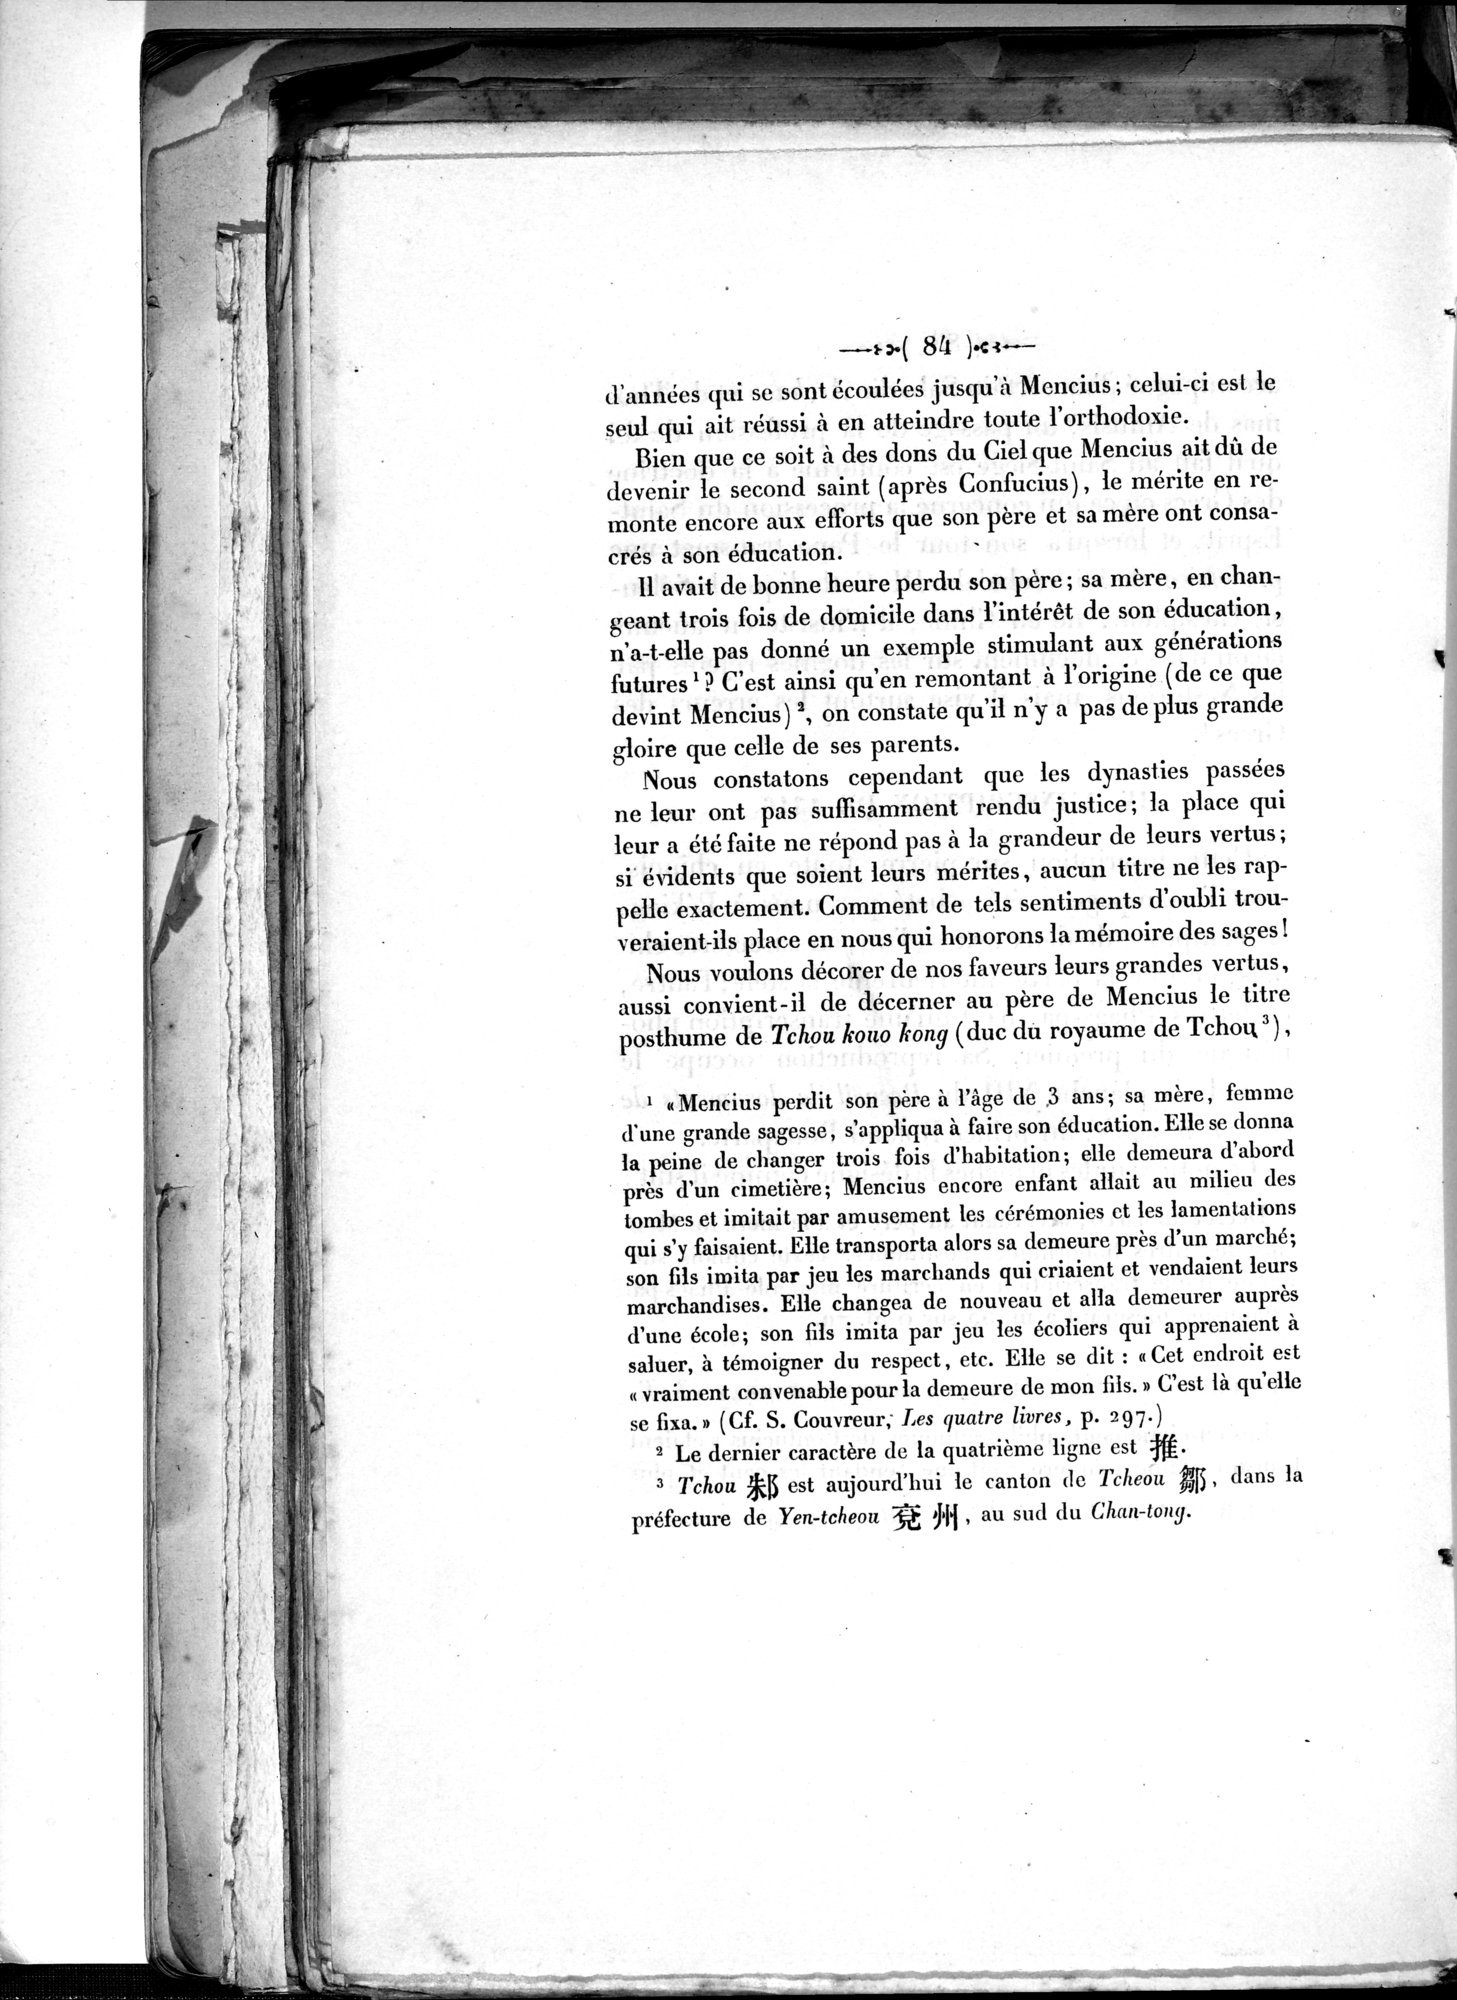 Notes d'epigraphie mongole-chinoise : vol.1 / Page 90 (Grayscale High Resolution Image)